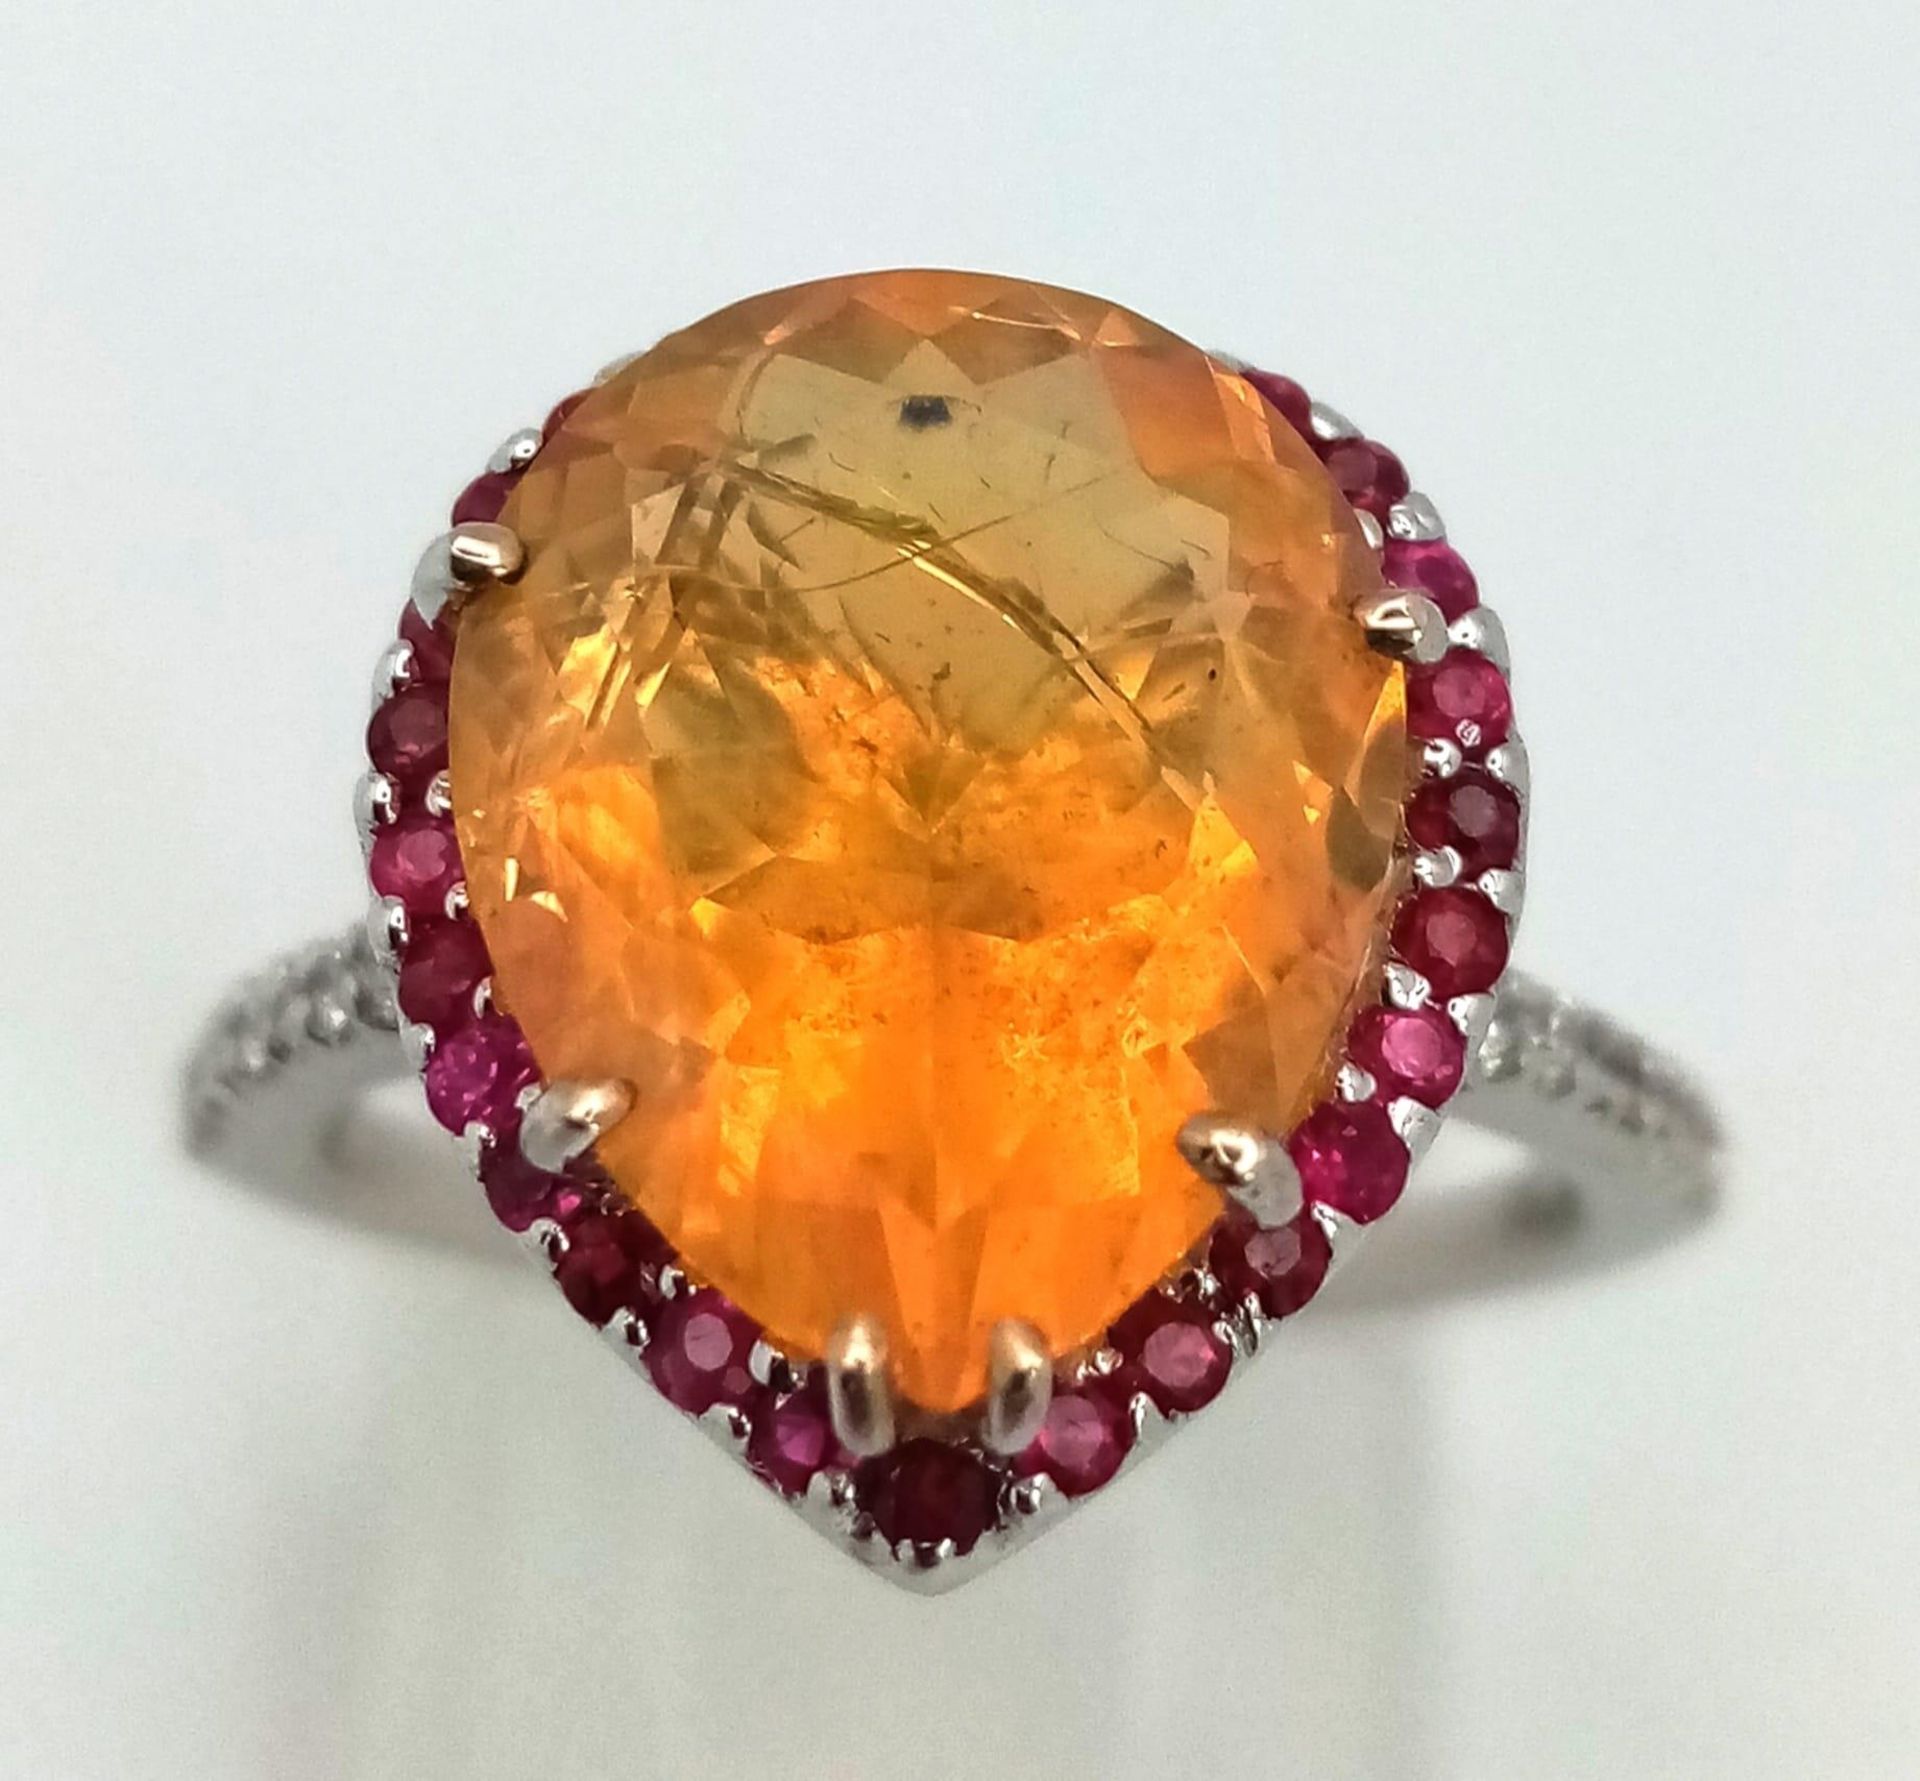 An 18K white gold ring with a pear cut fire opal surrounded by rubies and diamonds on the - Image 2 of 4